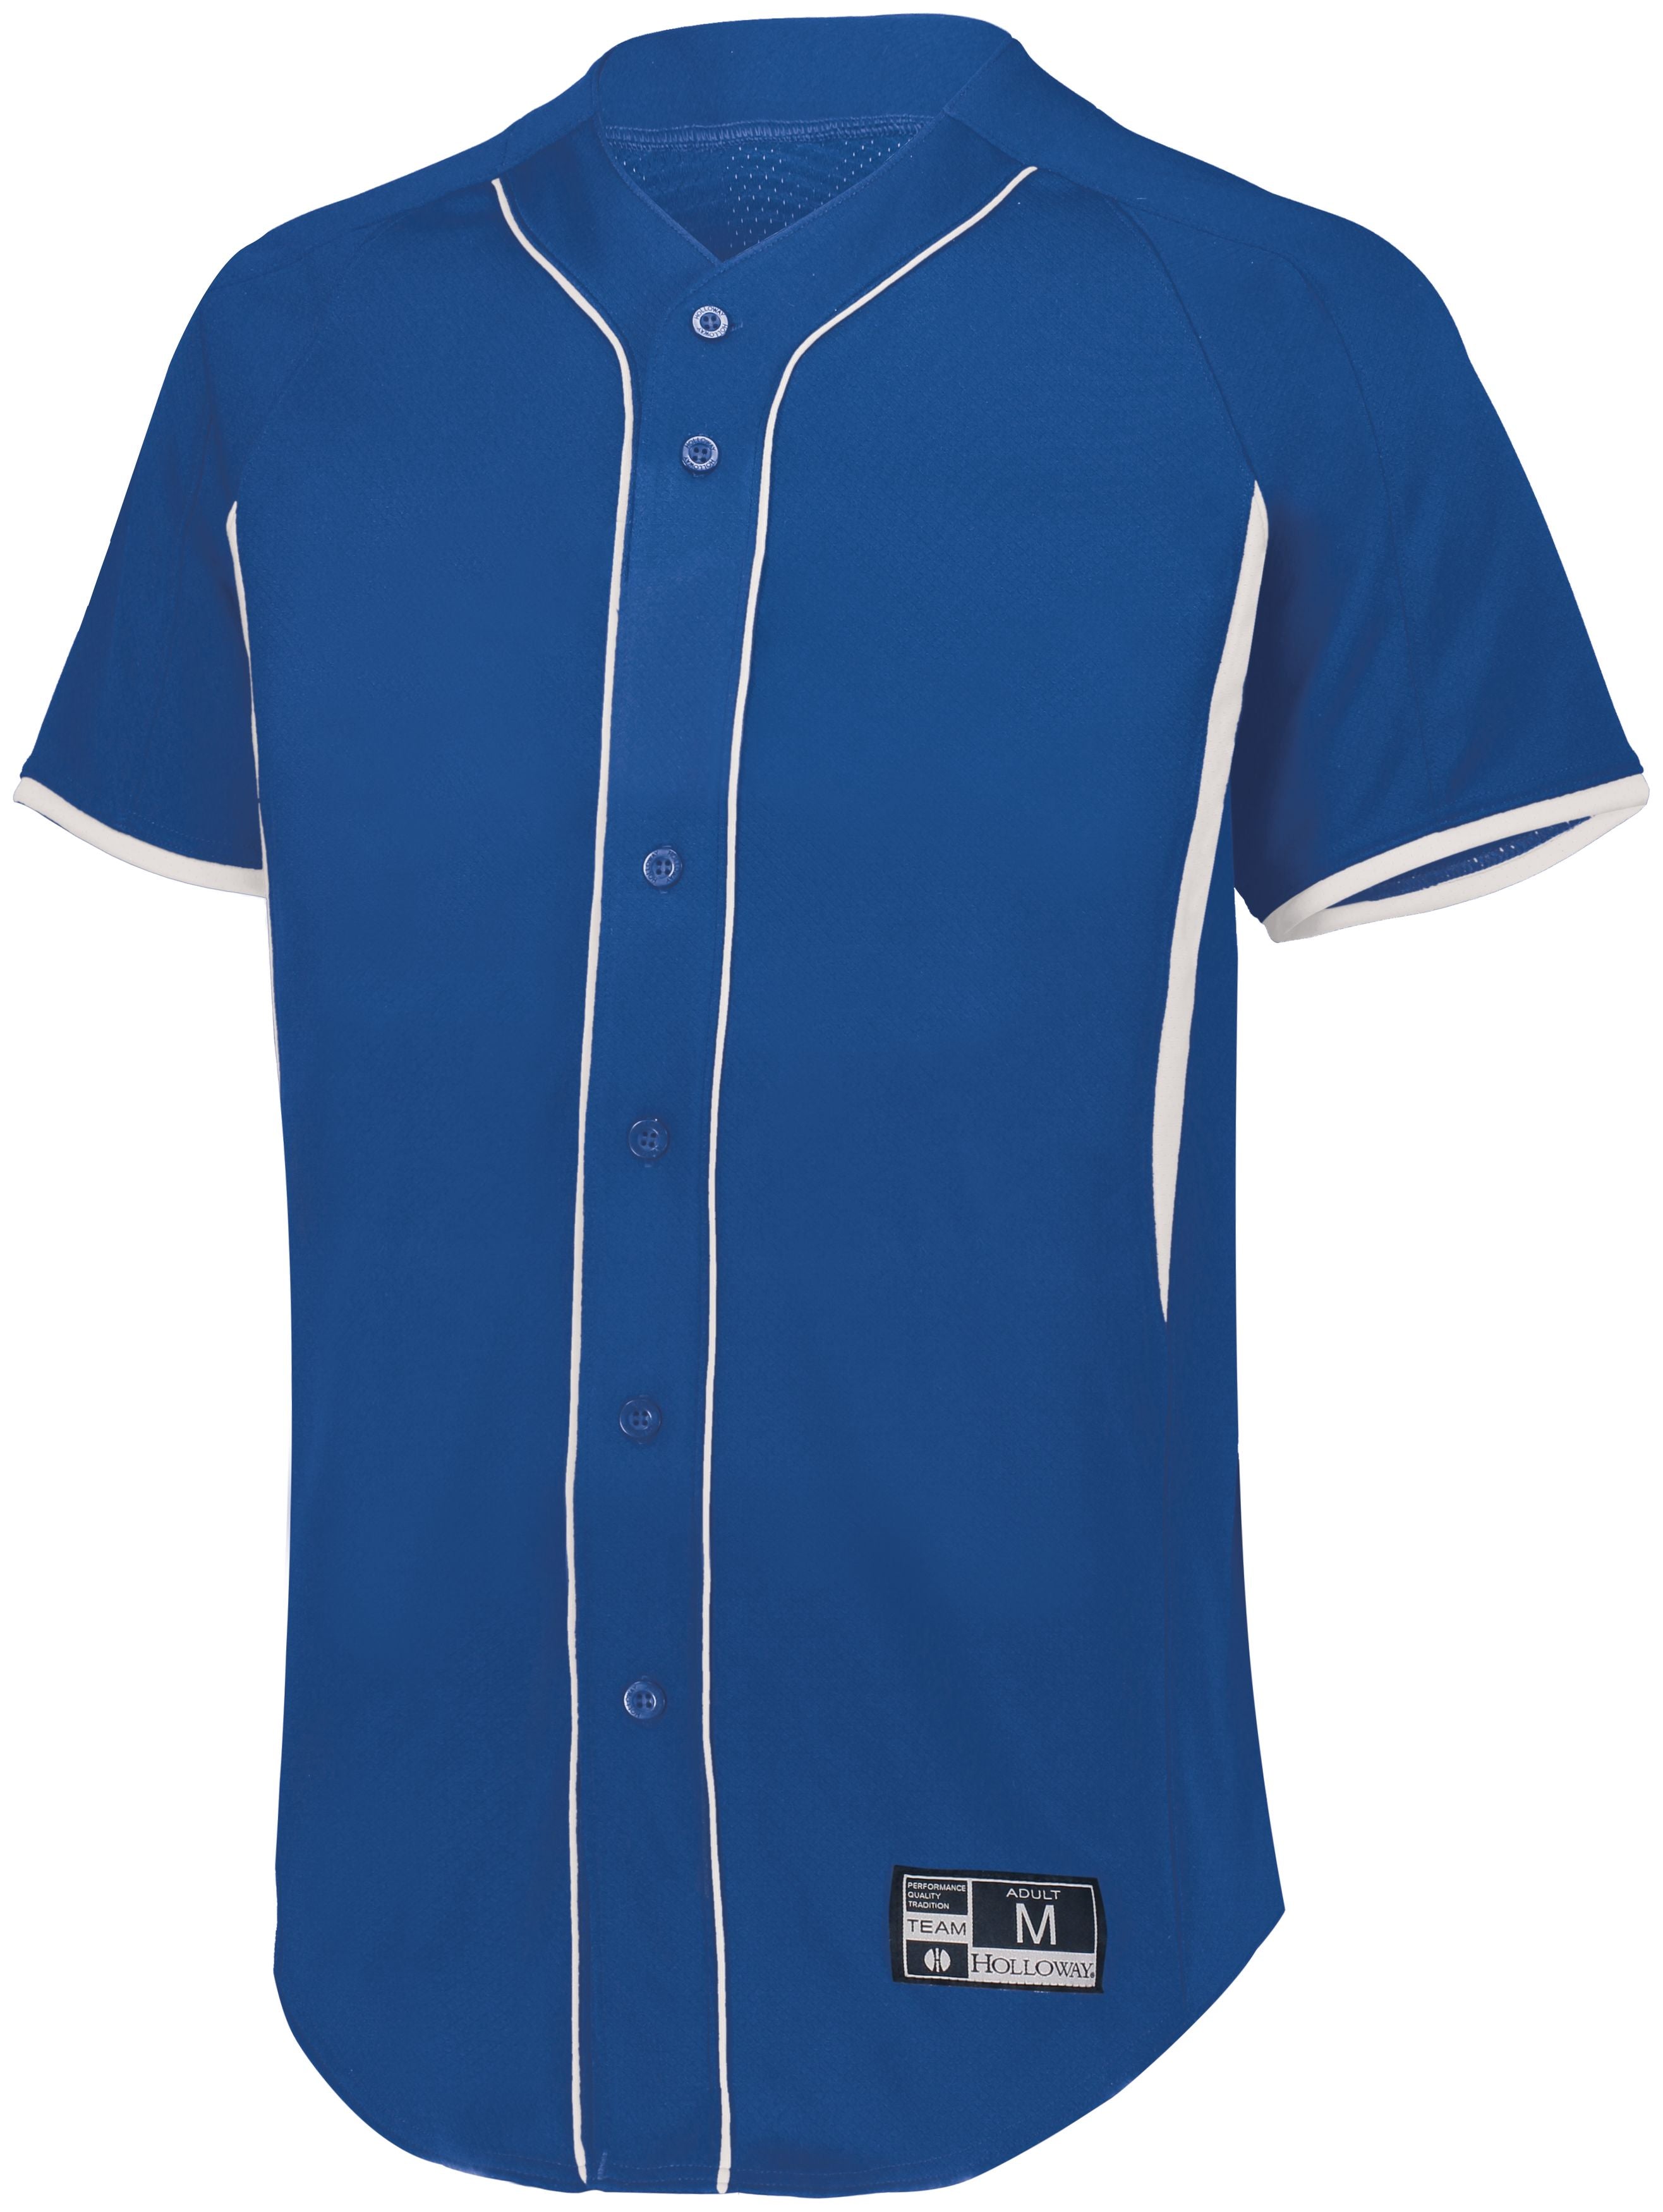 Holloway Youth  Game7 Full-Button Baseball Jersey in Royal/White  -Part of the Youth, Youth-Jersey, Baseball, Holloway, Shirts, All-Sports, All-Sports-1 product lines at KanaleyCreations.com